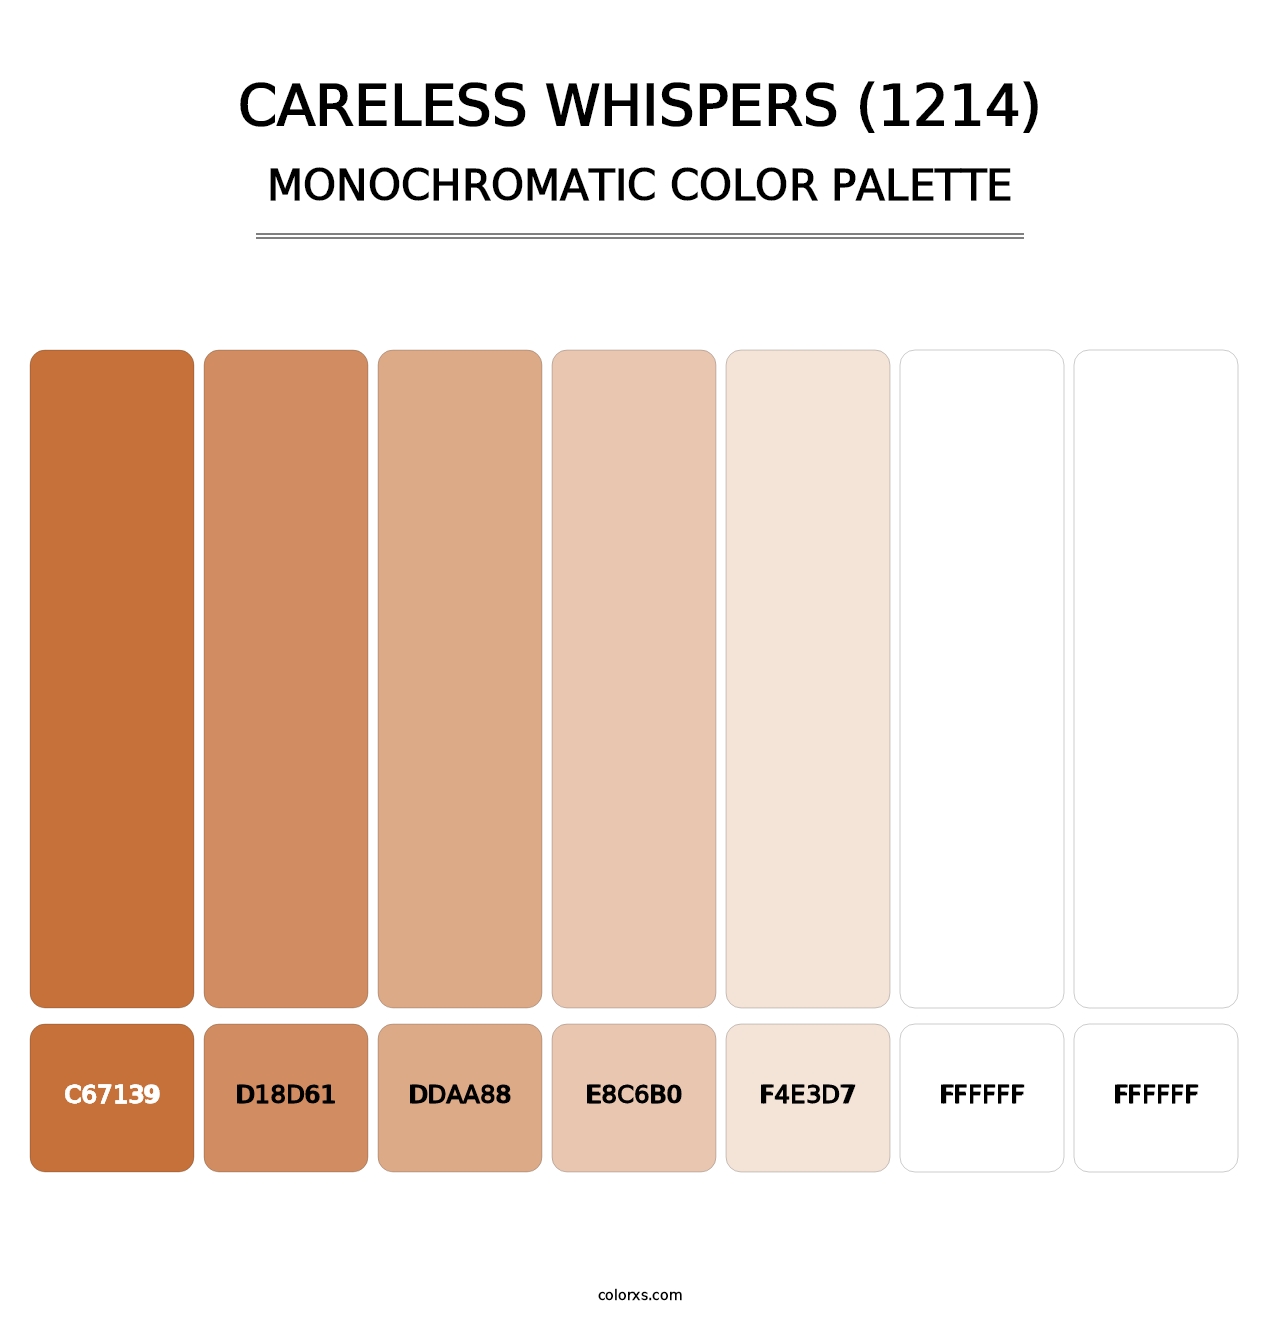 Careless Whispers (1214) - Monochromatic Color Palette